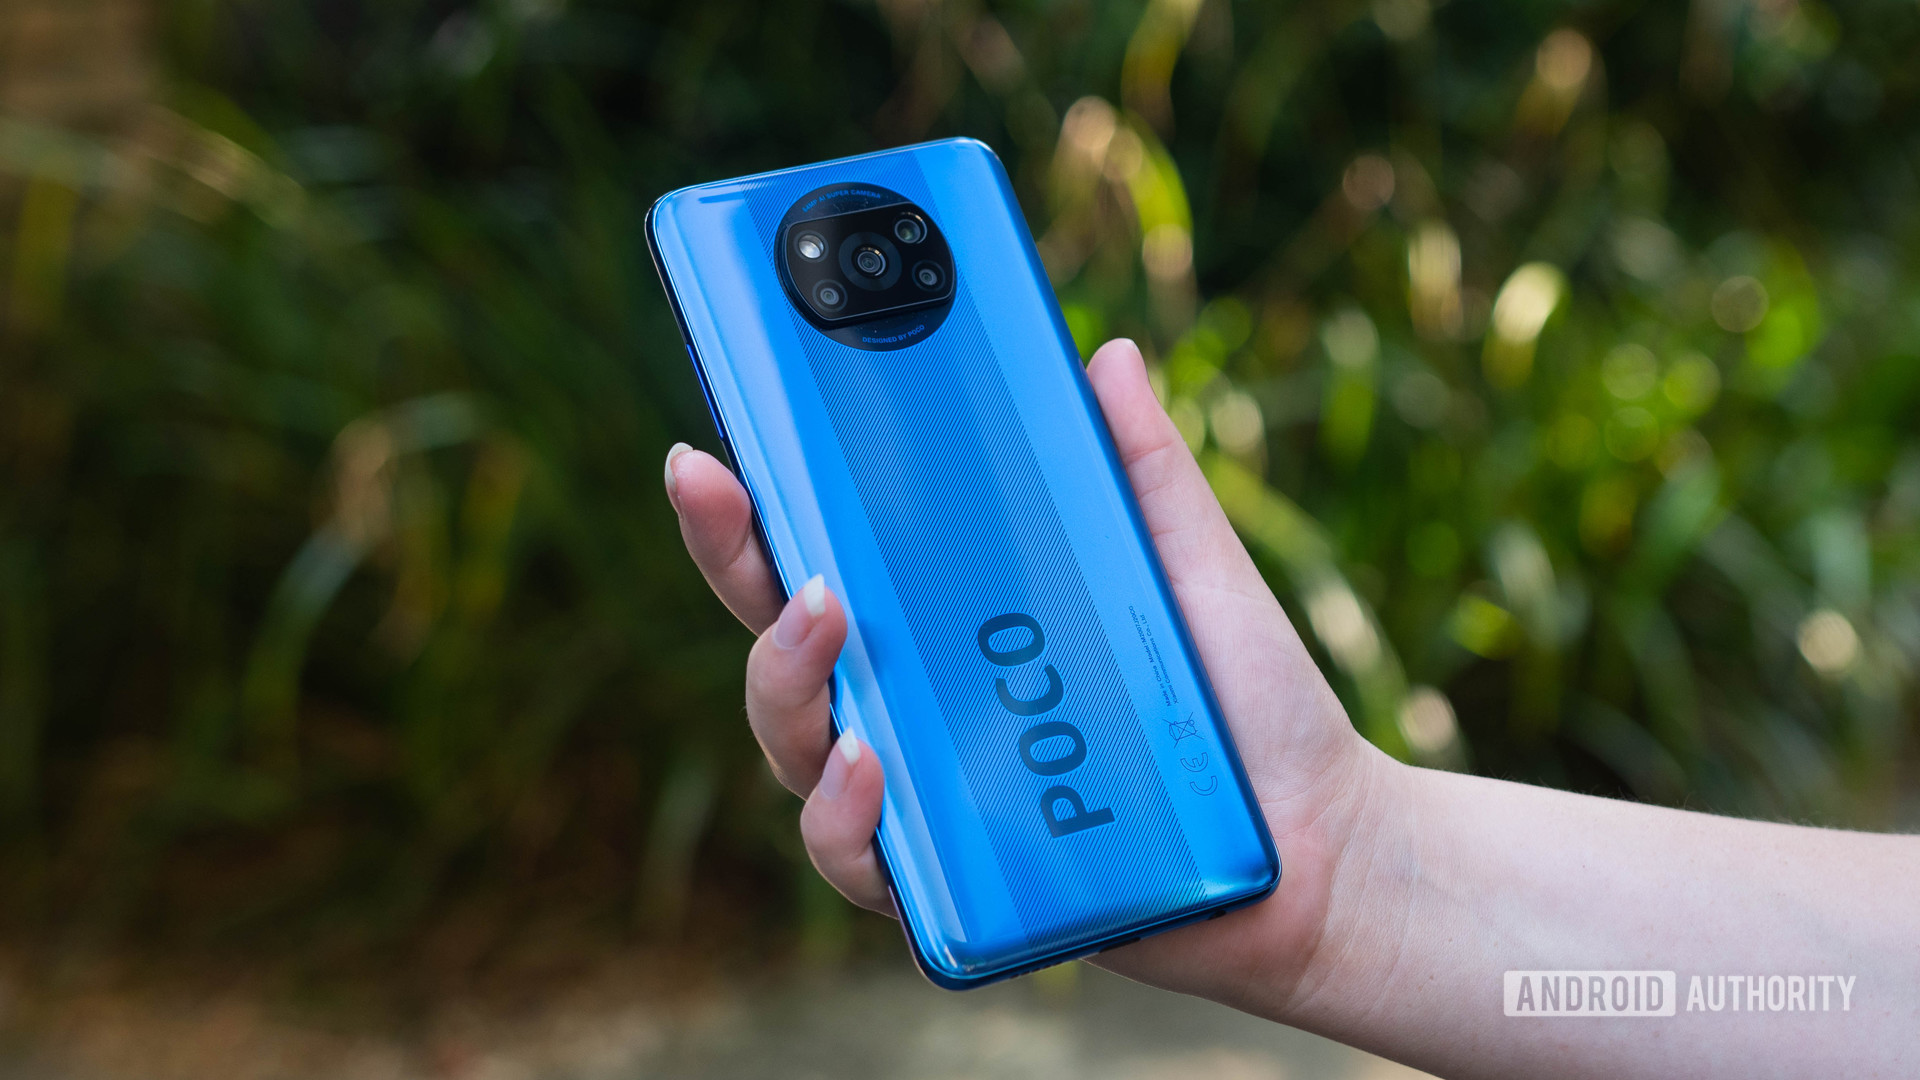 https://www.androidauthority.com/wp-content/uploads/2020/09/Xiaomi-Poco-X3-NFC-held-in-the-hand-outside-to-show-off-the-rear-side.jpg